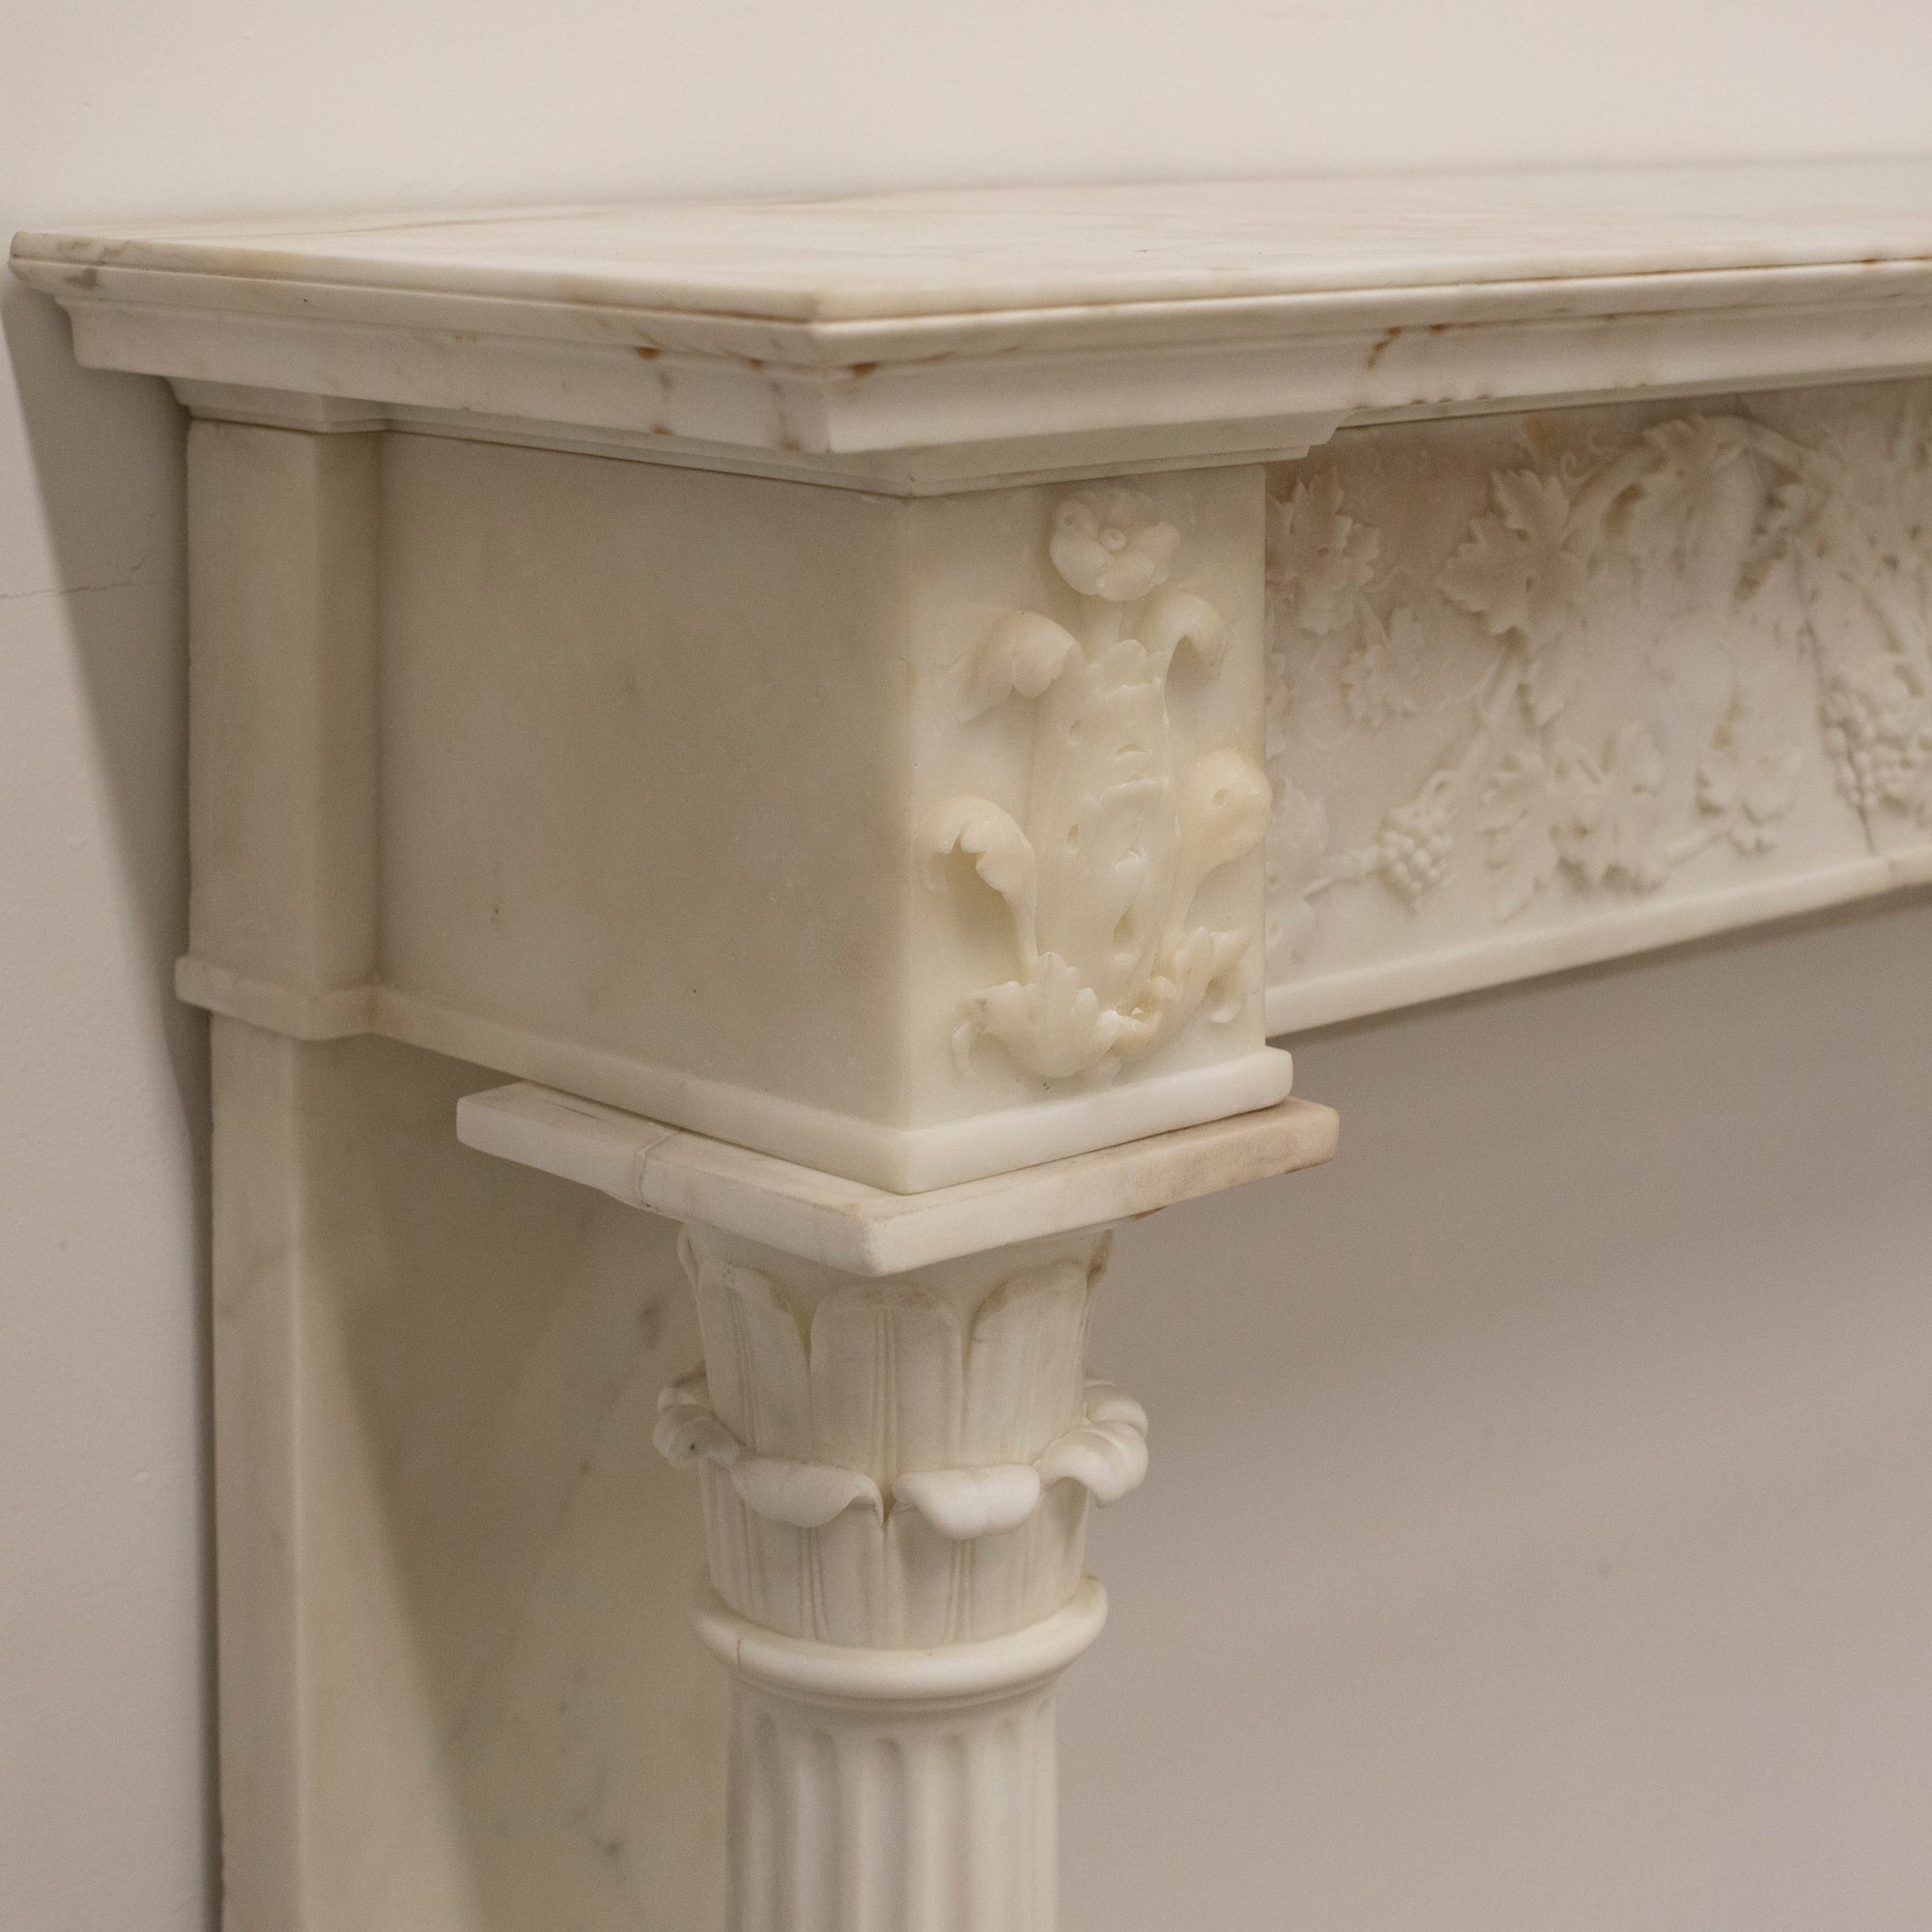 Antique Early 19th Century Marble Fireplace Surround | The Architectural Forum